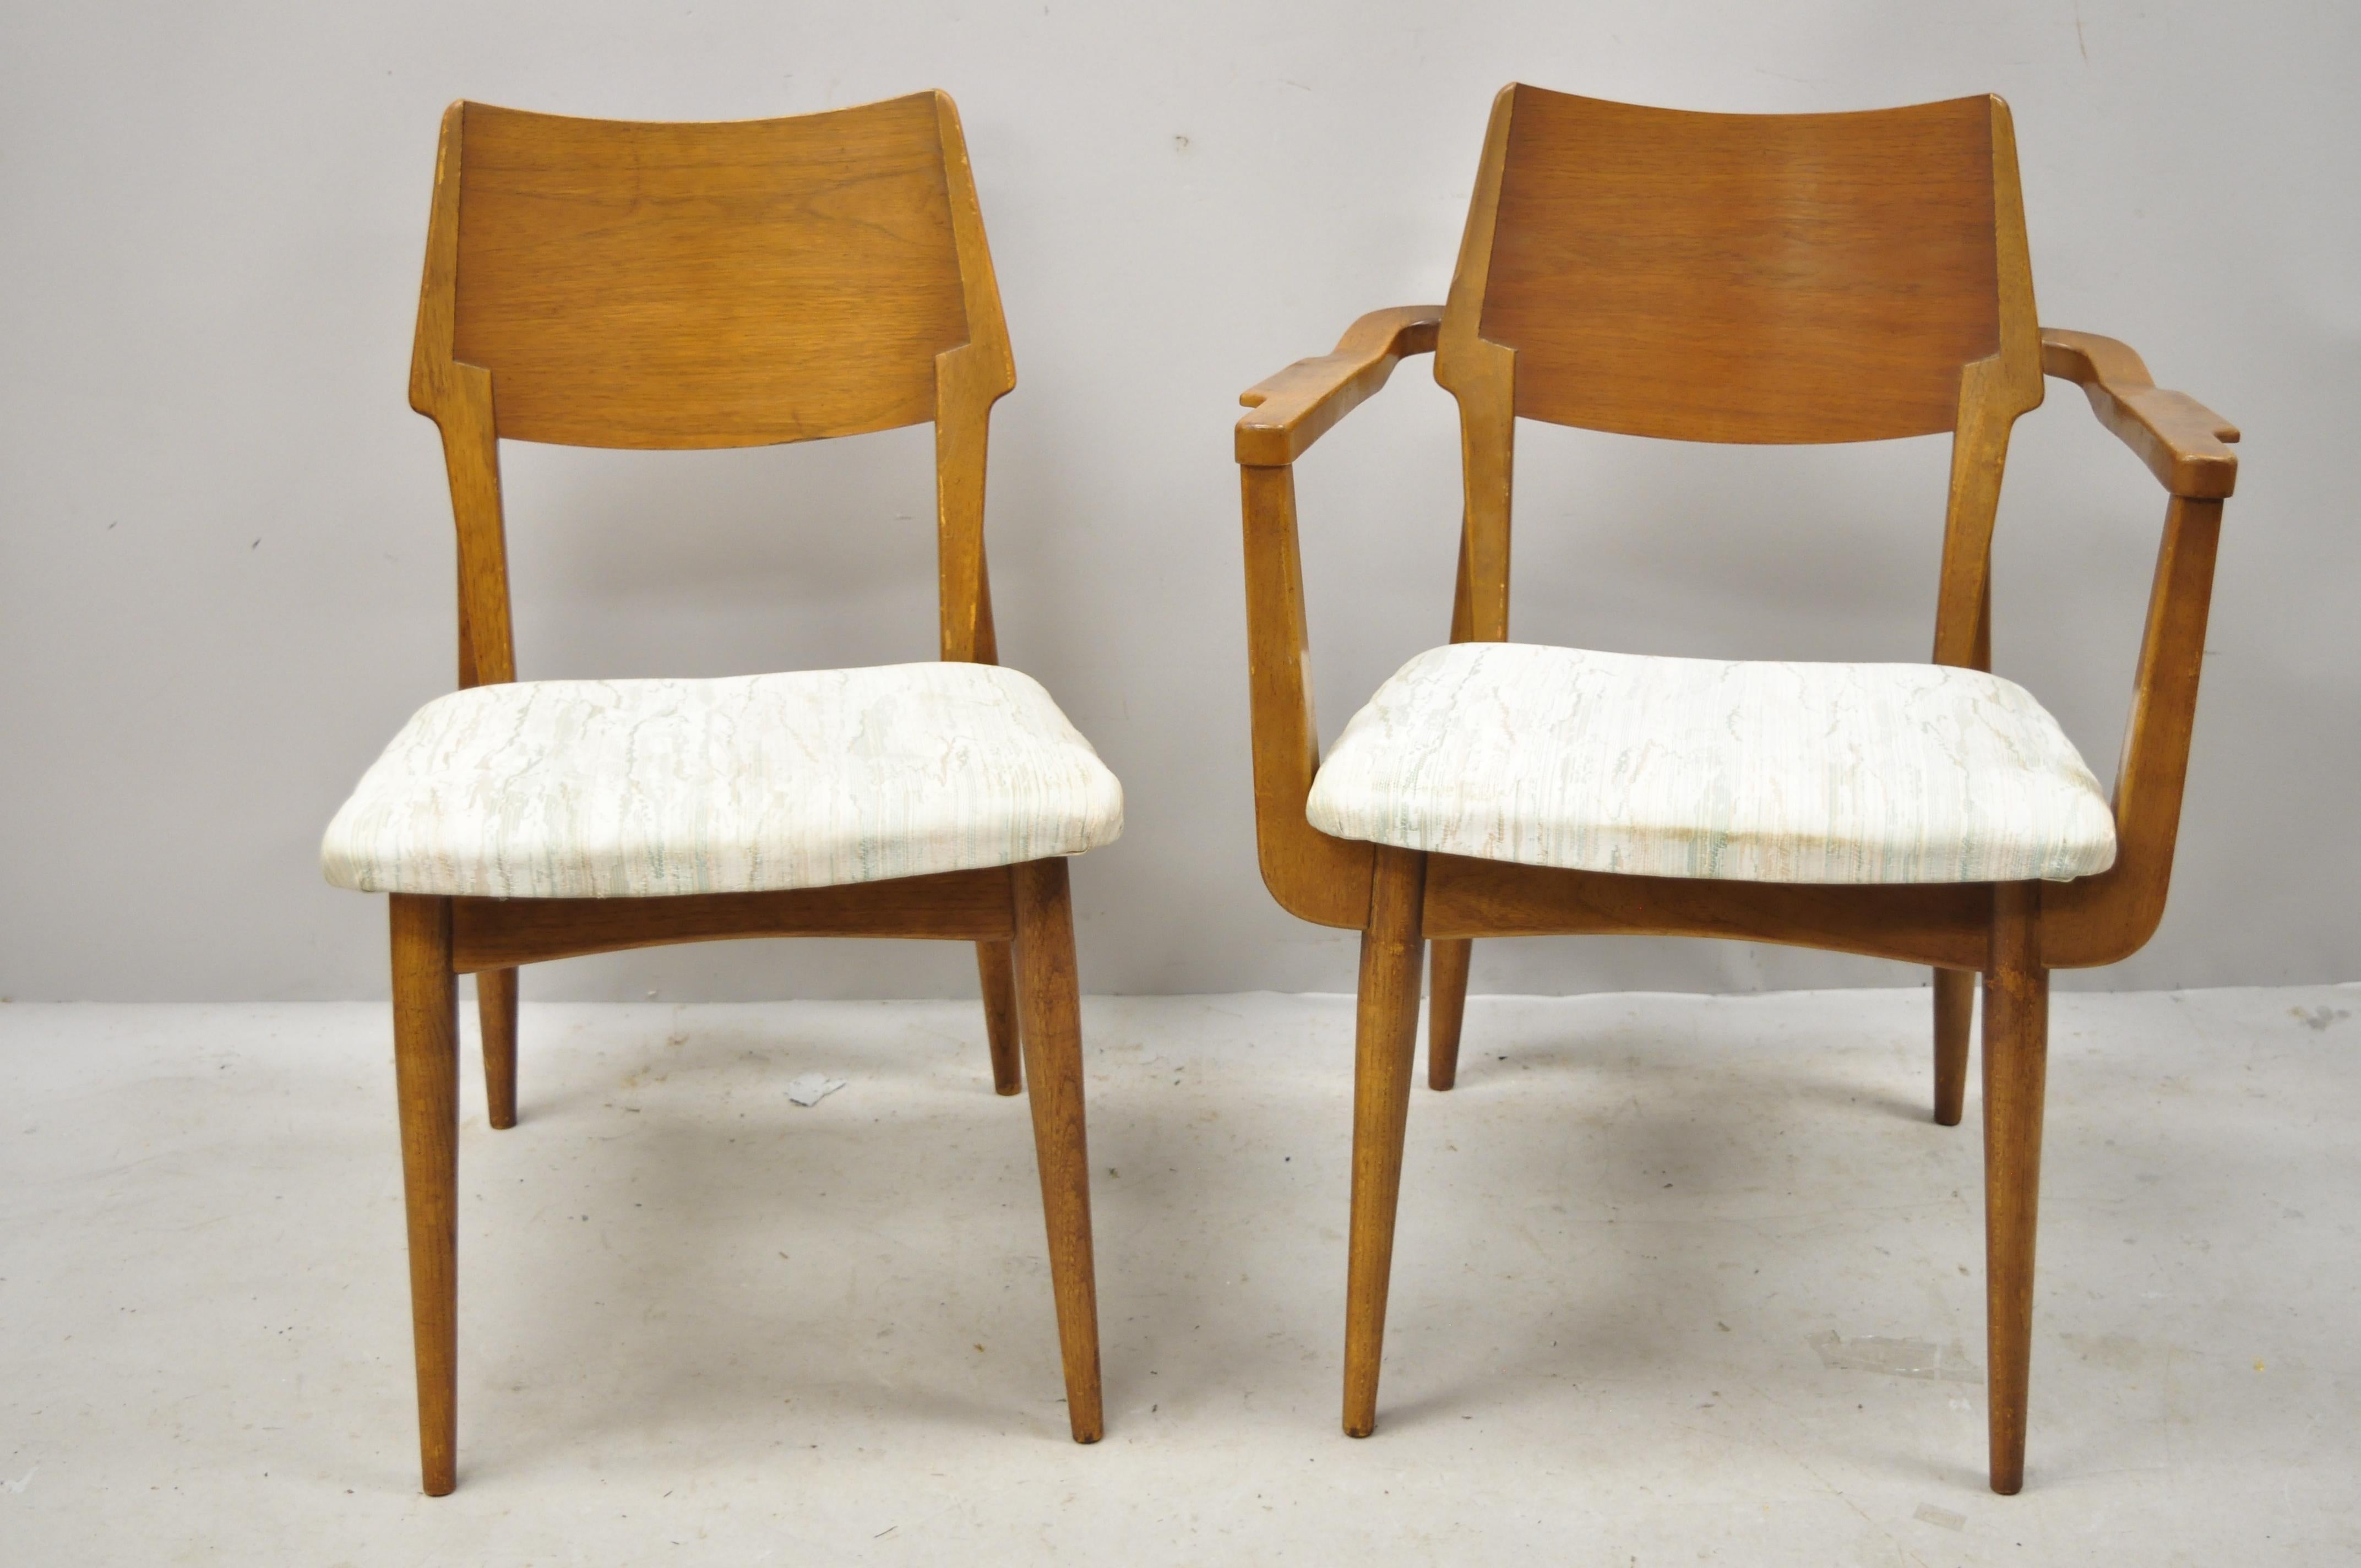 Vintage Mid-Century Modern sculptural walnut dining chairs - set of 6. Set includes (2) armchairs, (4) side chairs, beautiful wood grain, clean modernist lines, sleek sculptural form, circa mid-20th century. Measurements: Armchairs: 31